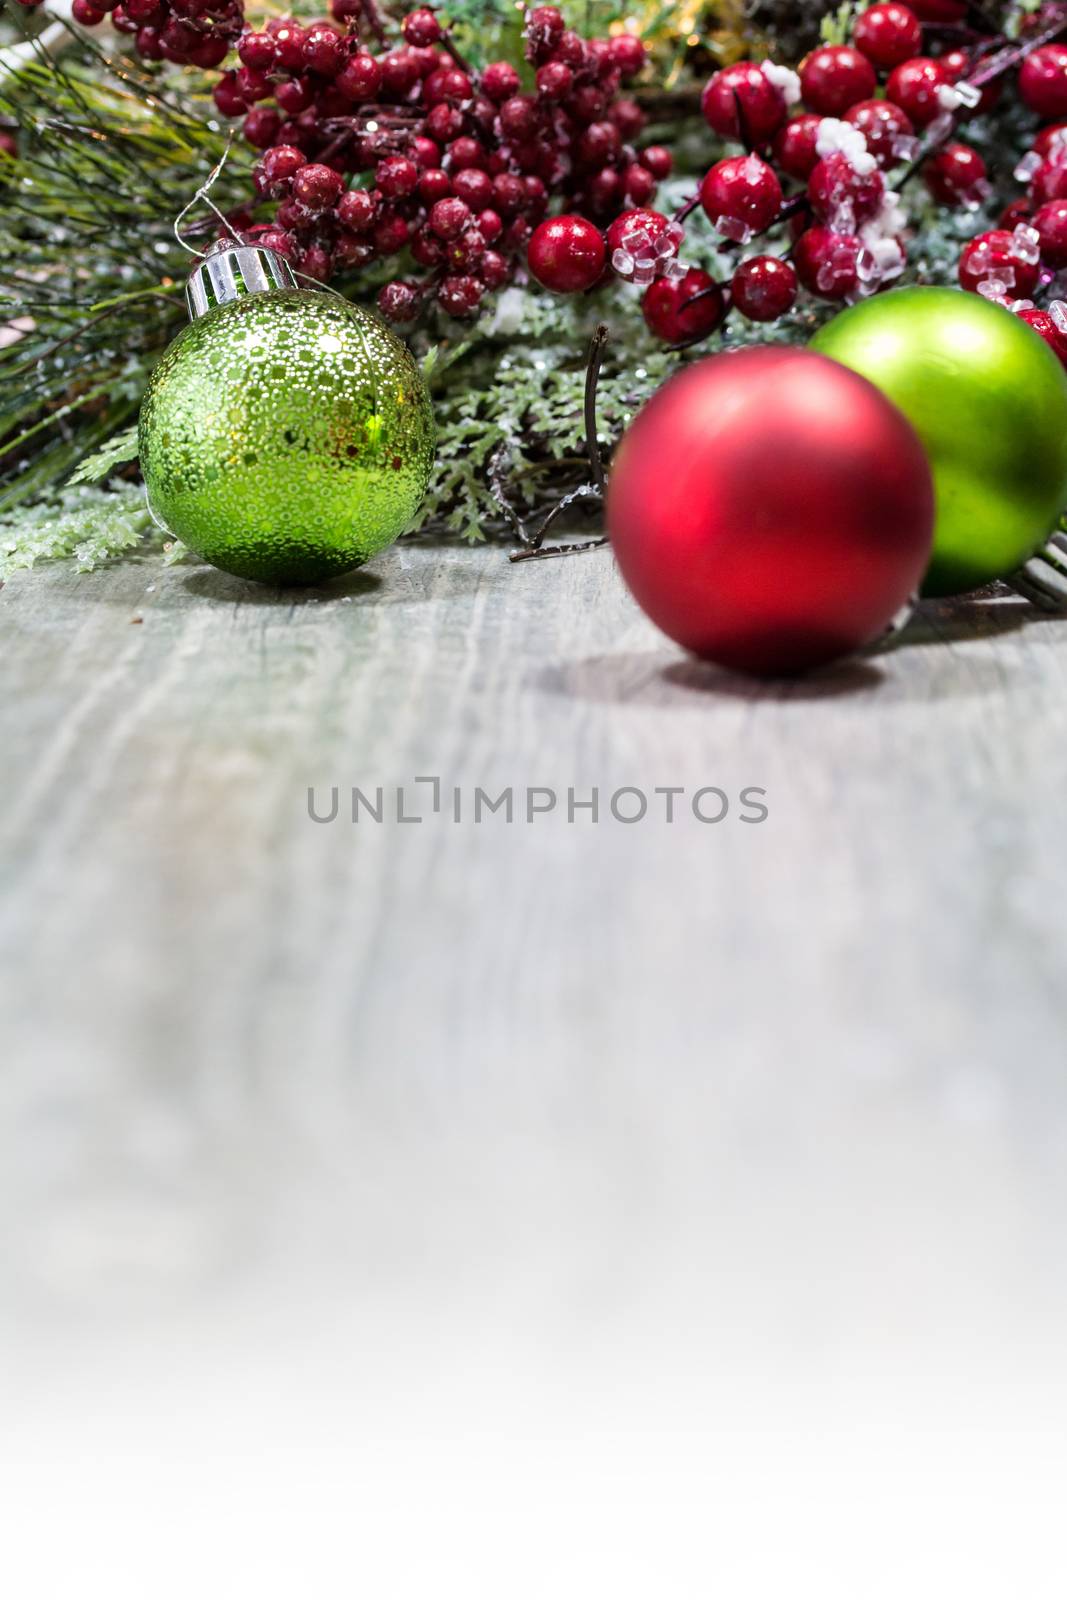 A wooden background with Christmas ornaments and decorations